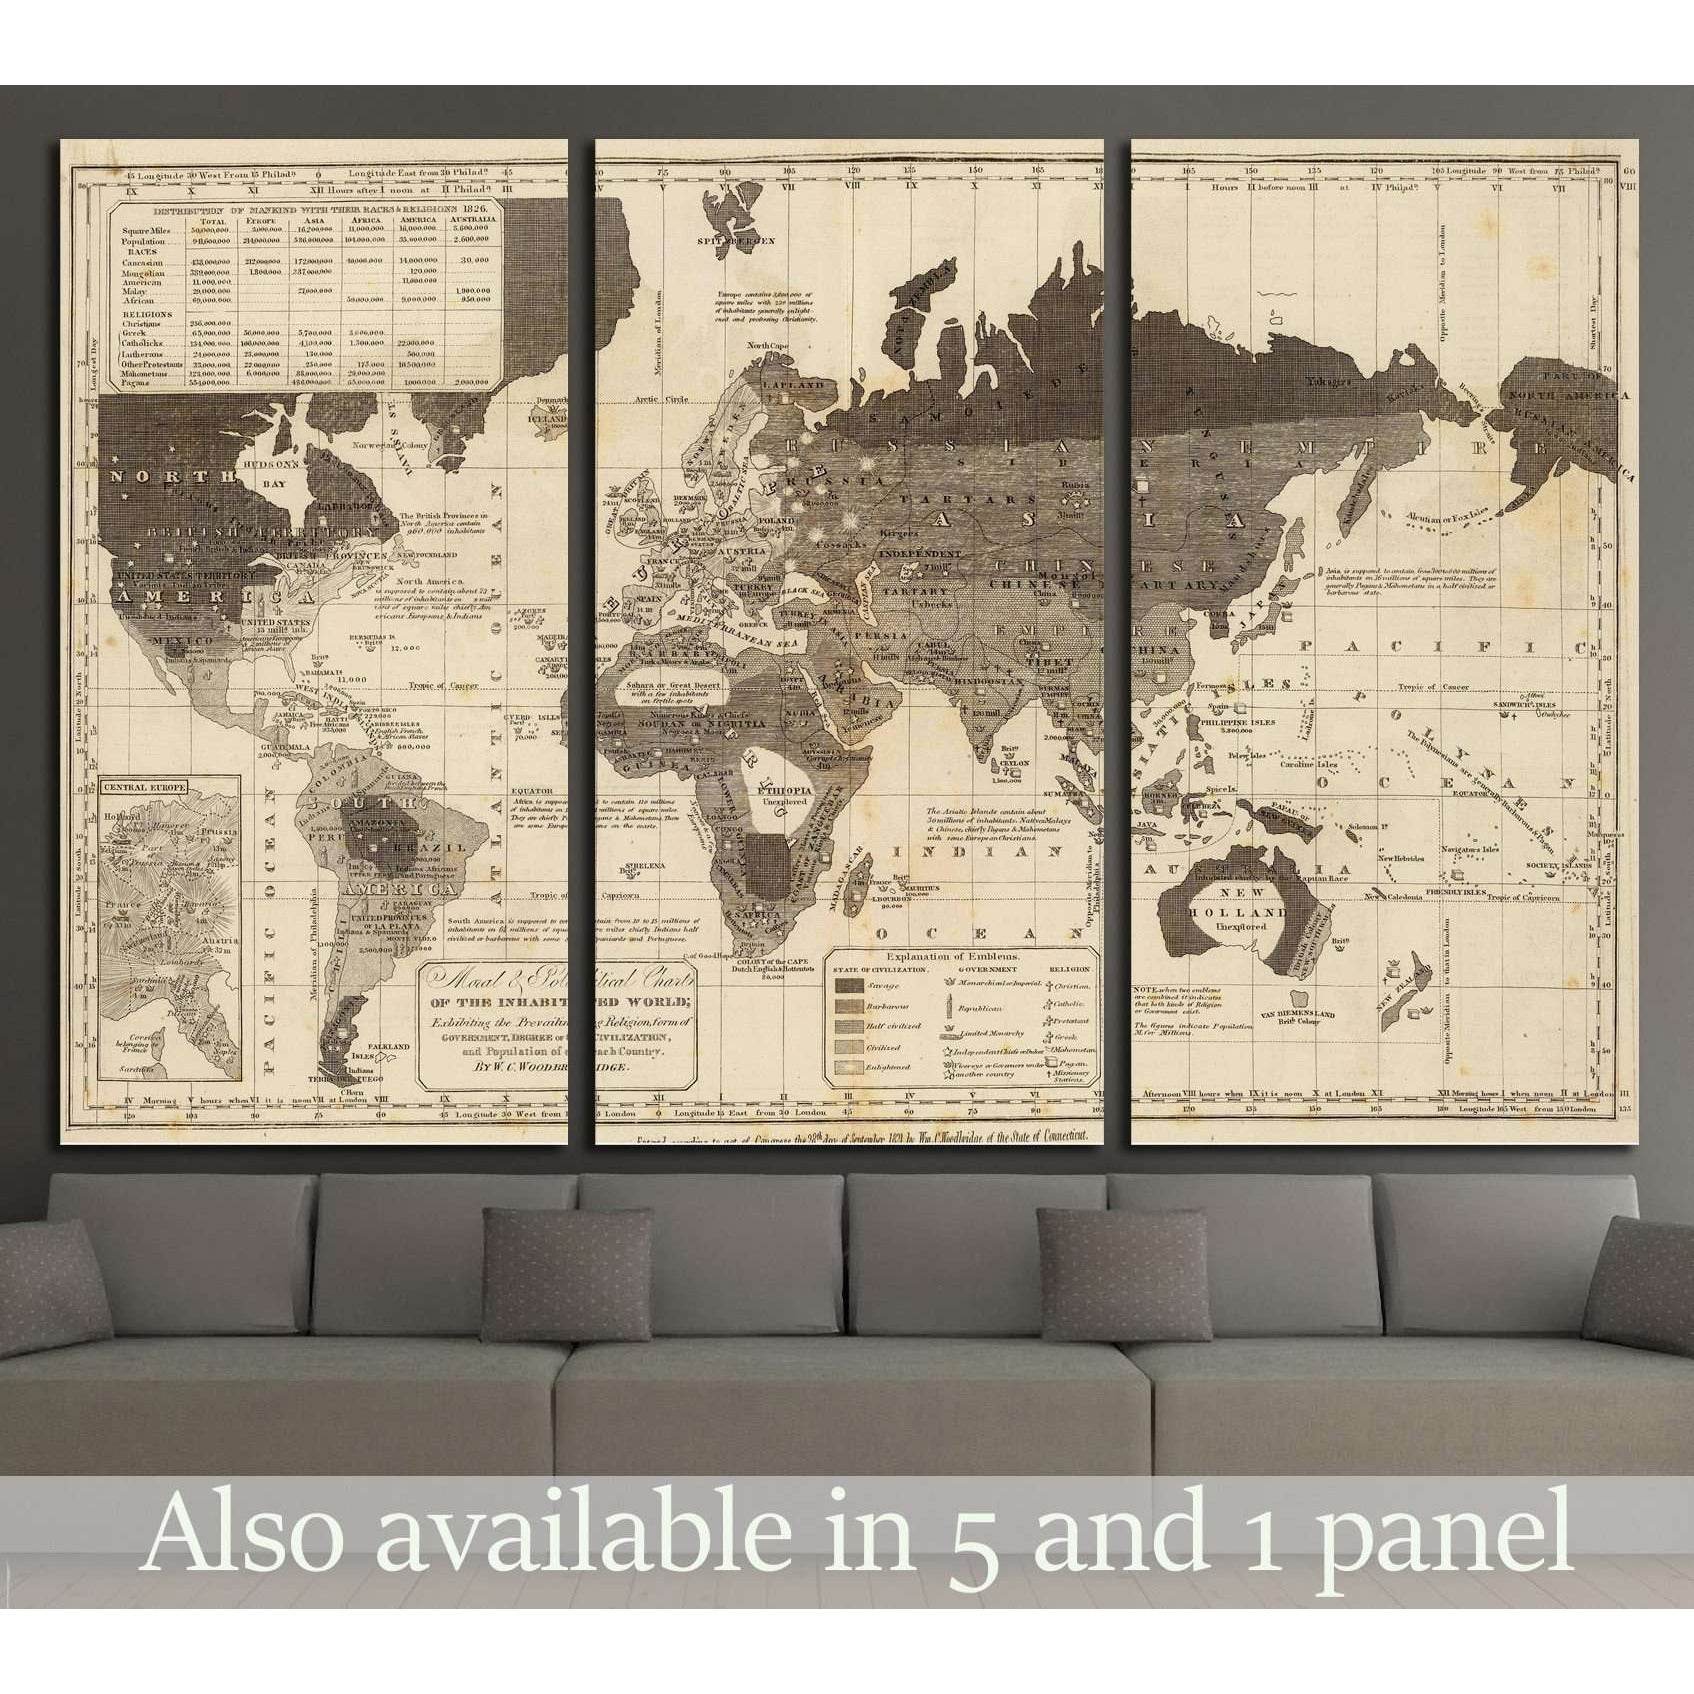 Old World Map №1491 Ready to Hang Canvas Print